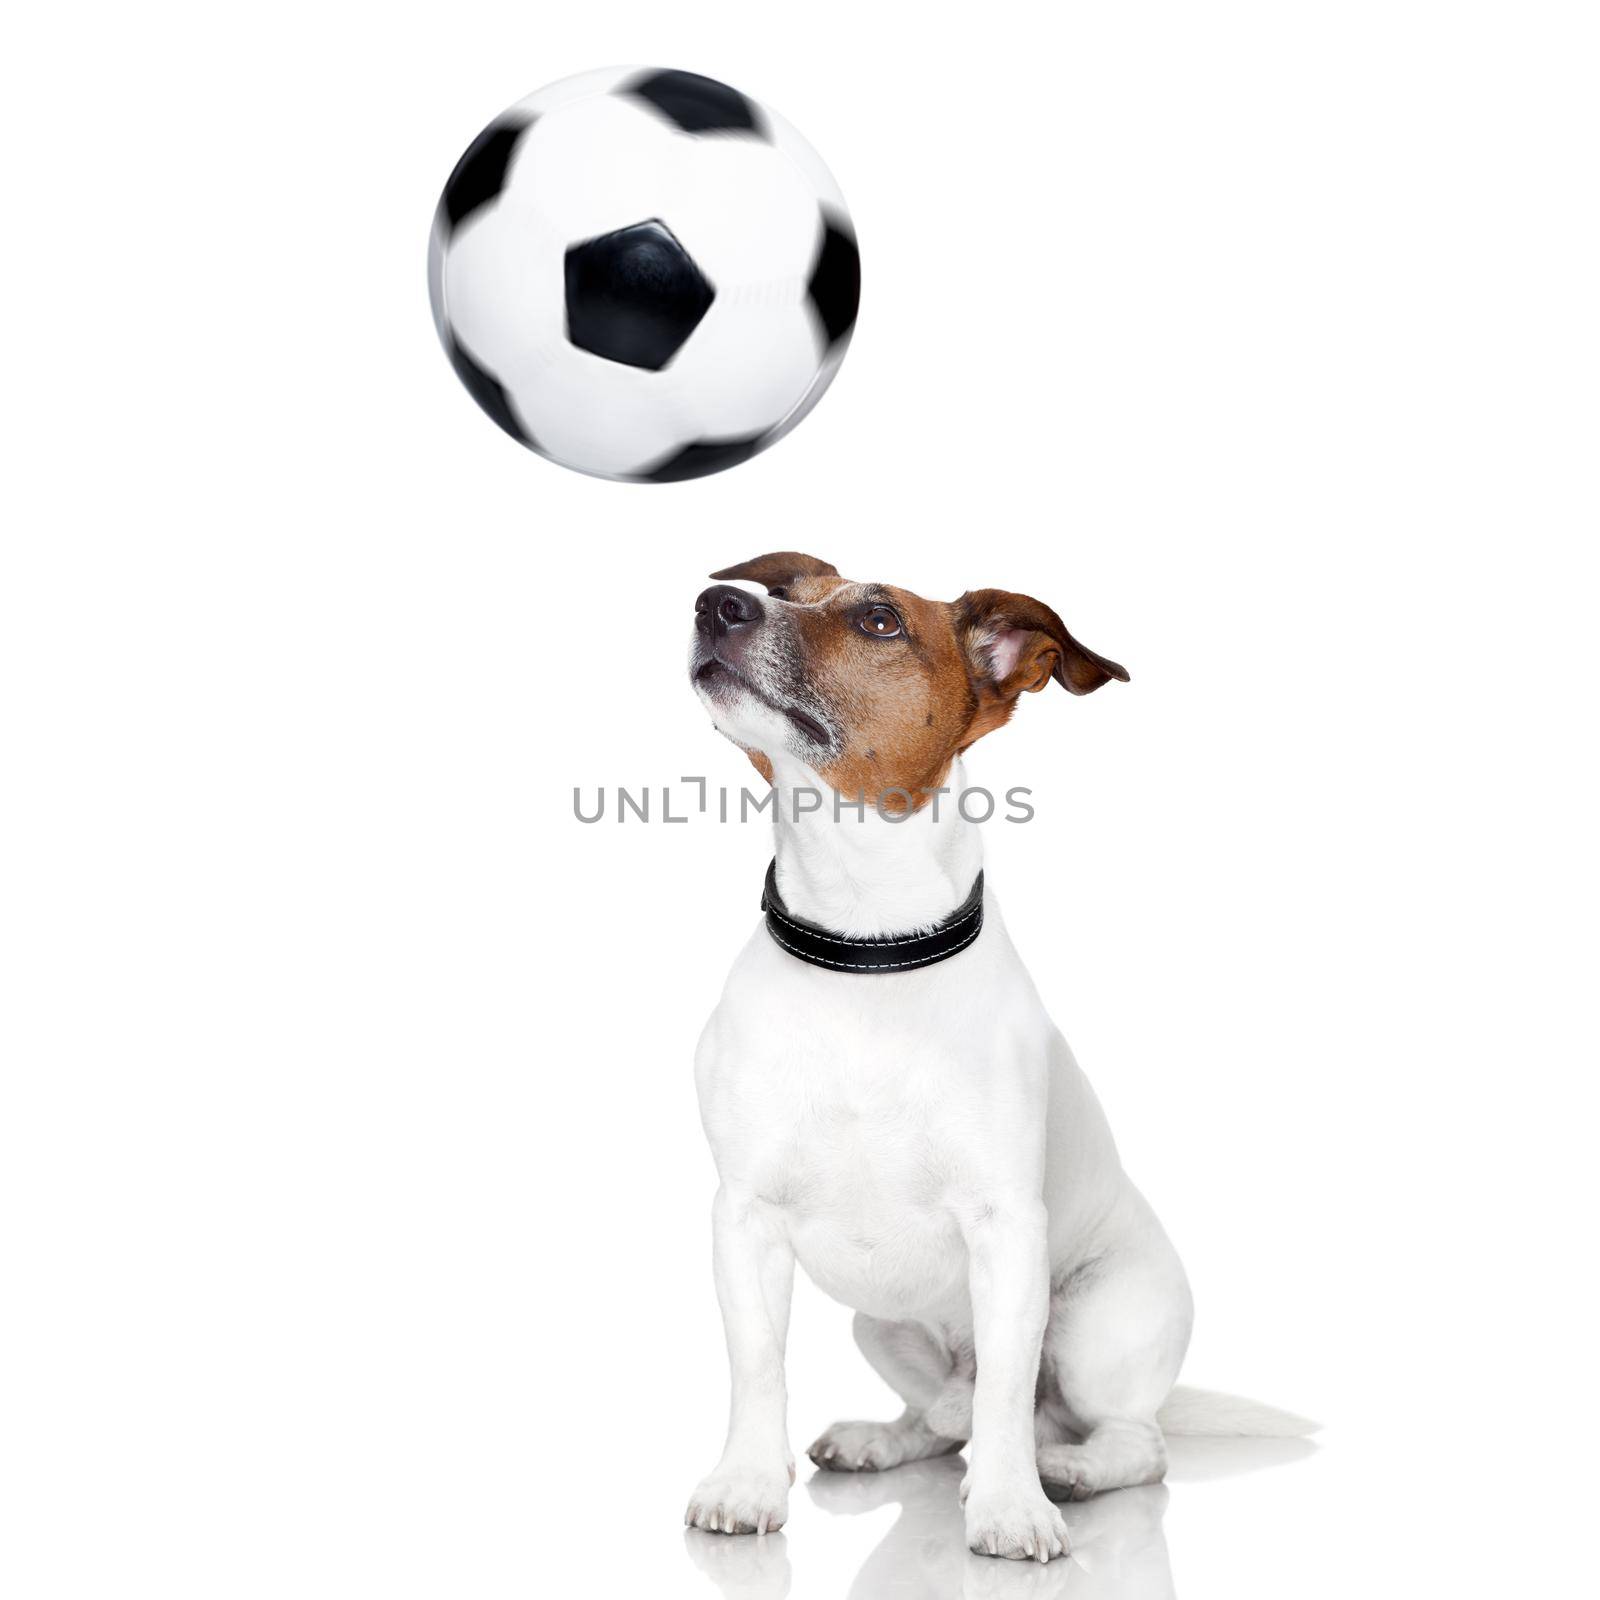 soccer dog with spinning ball over the nose